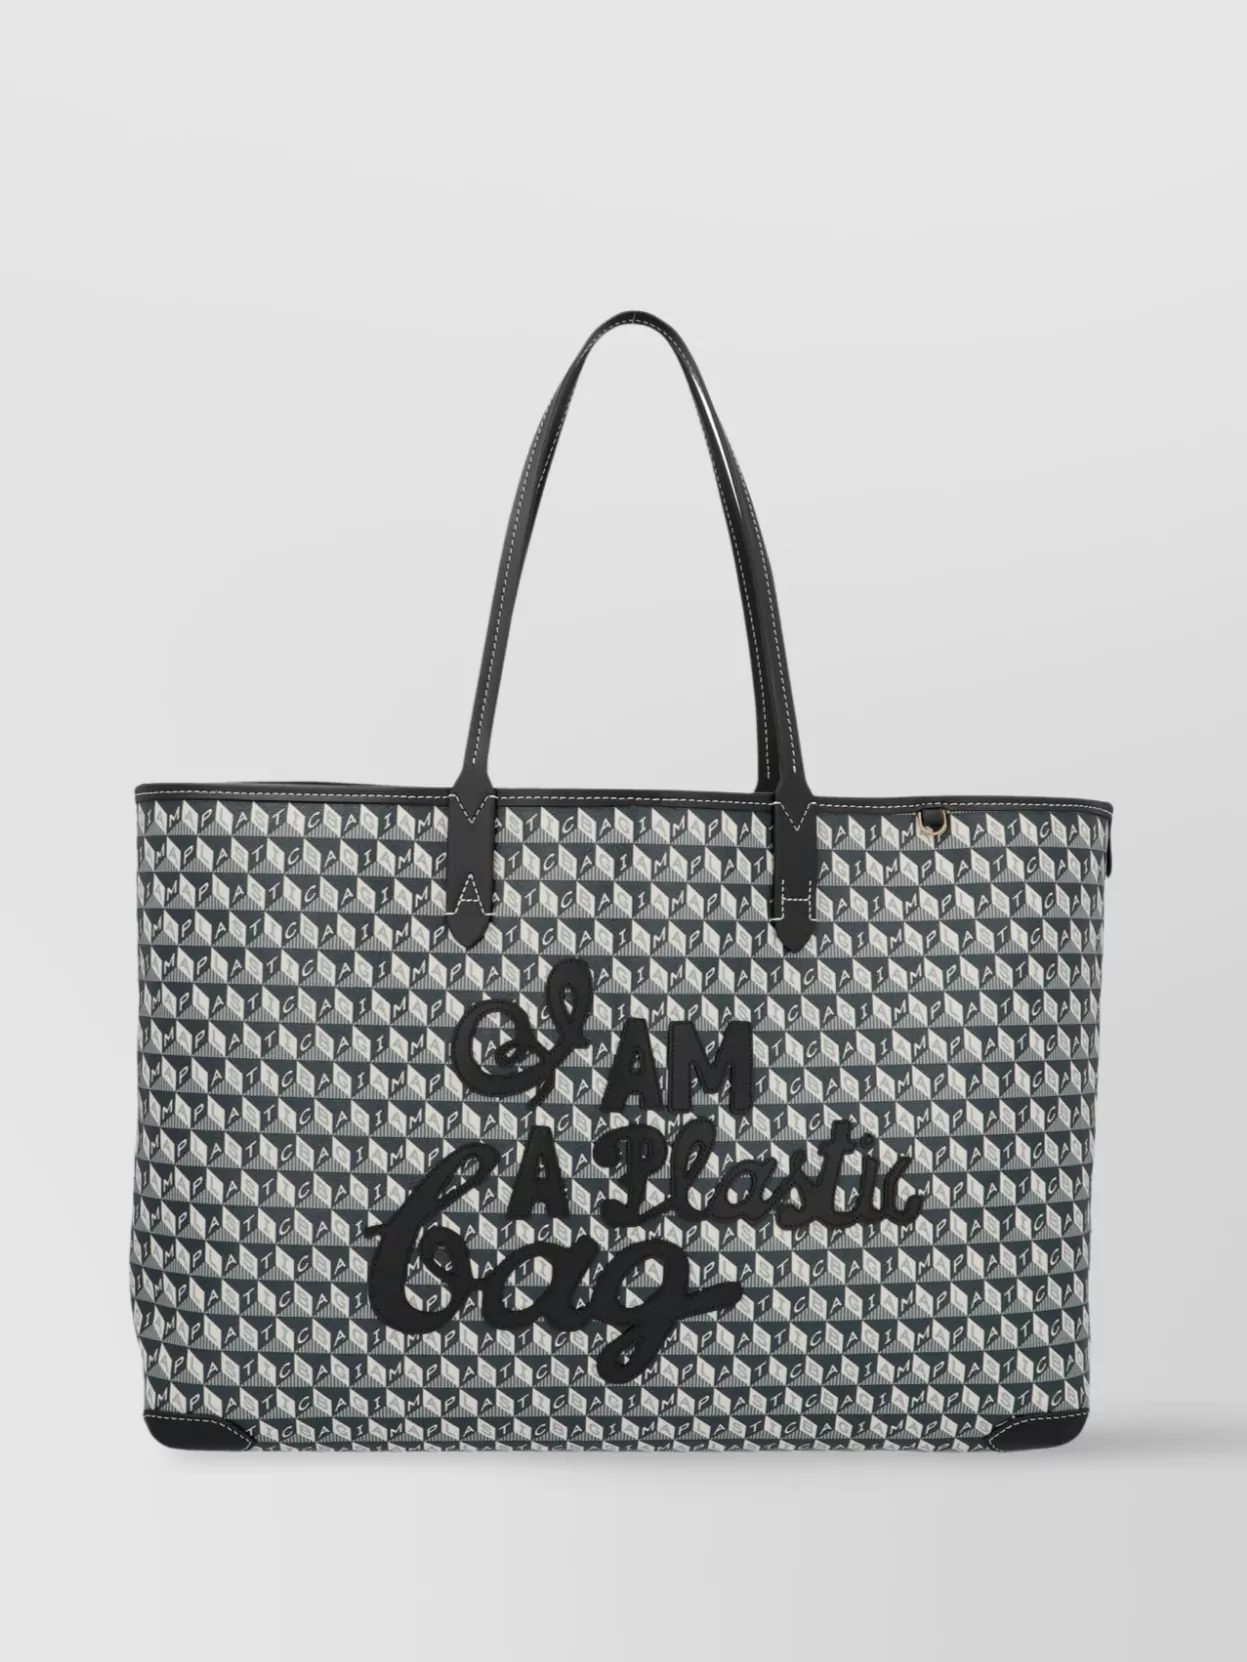 Shop Anya Hindmarch Shopper Bag With Top Handles And Graphic Print